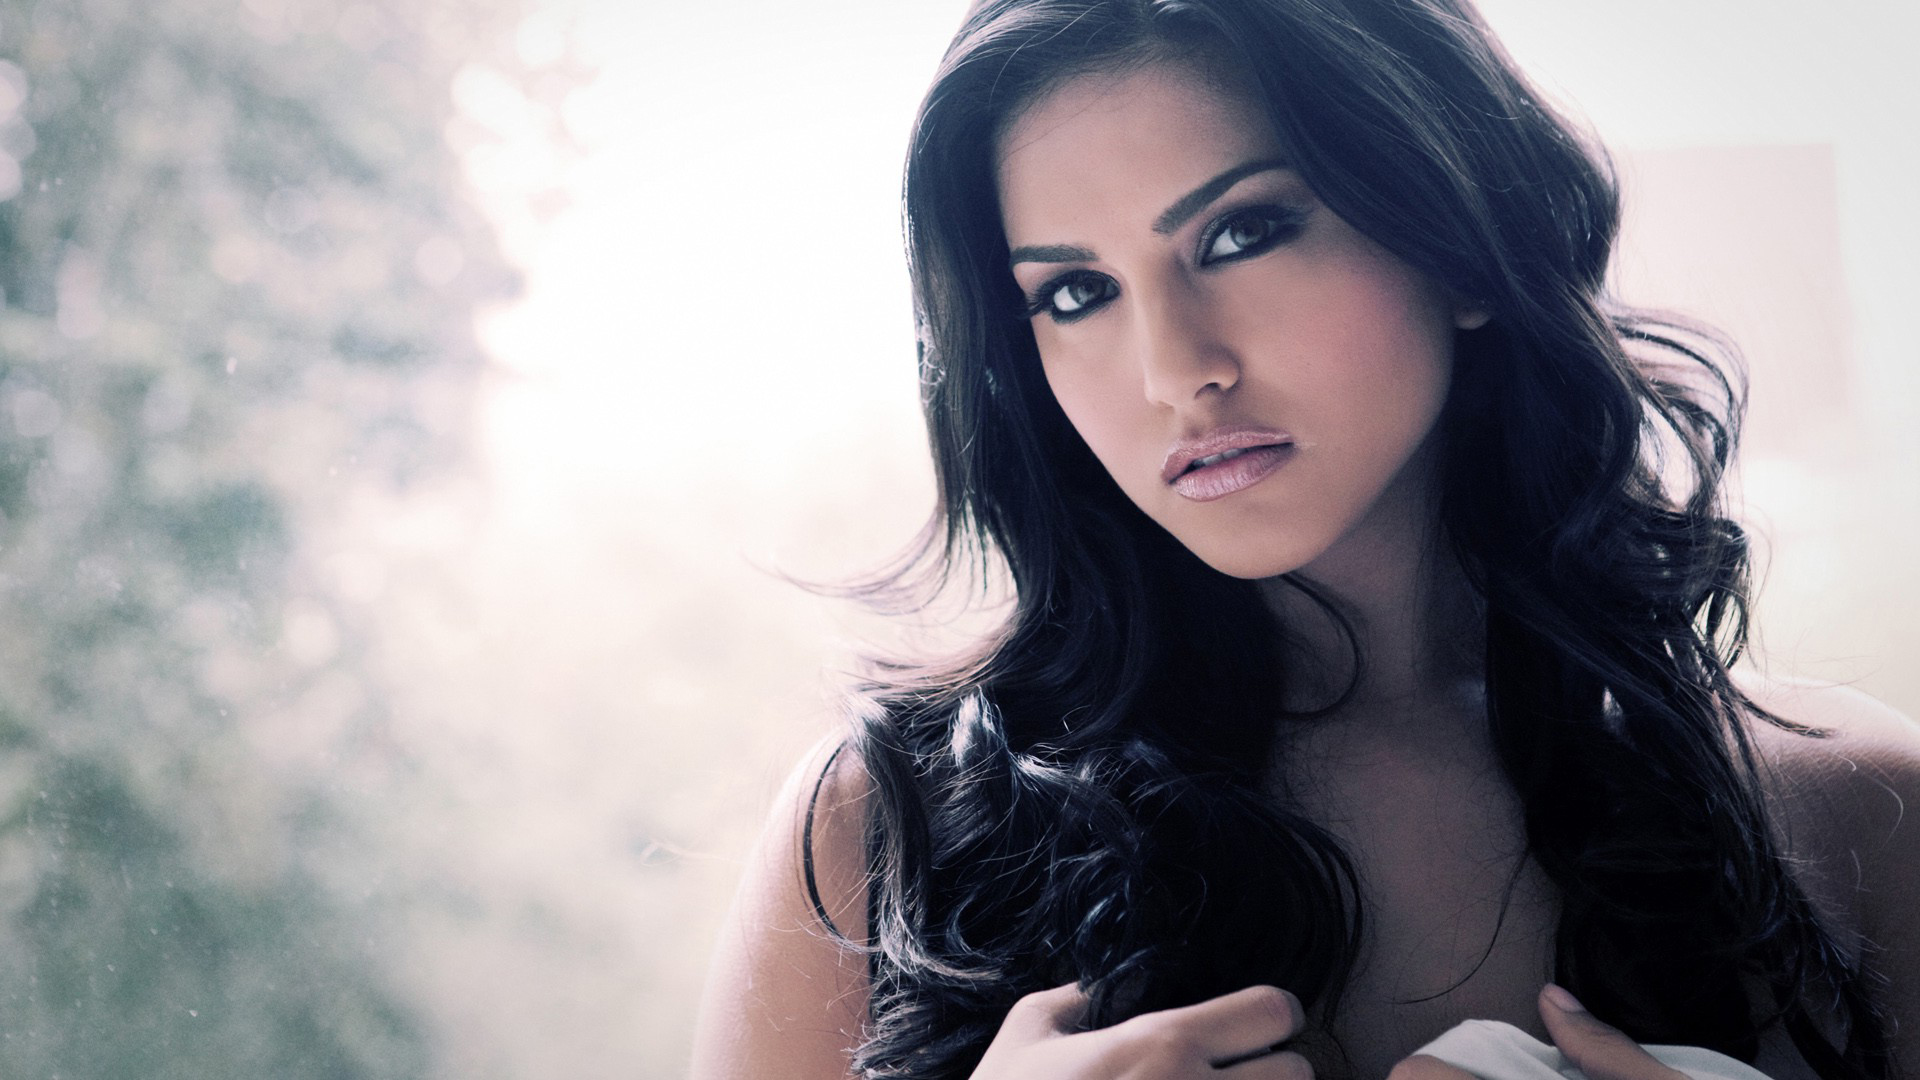 13 Sunny Leone HD Wallpapers Backgrounds - Wallpaper Abyss